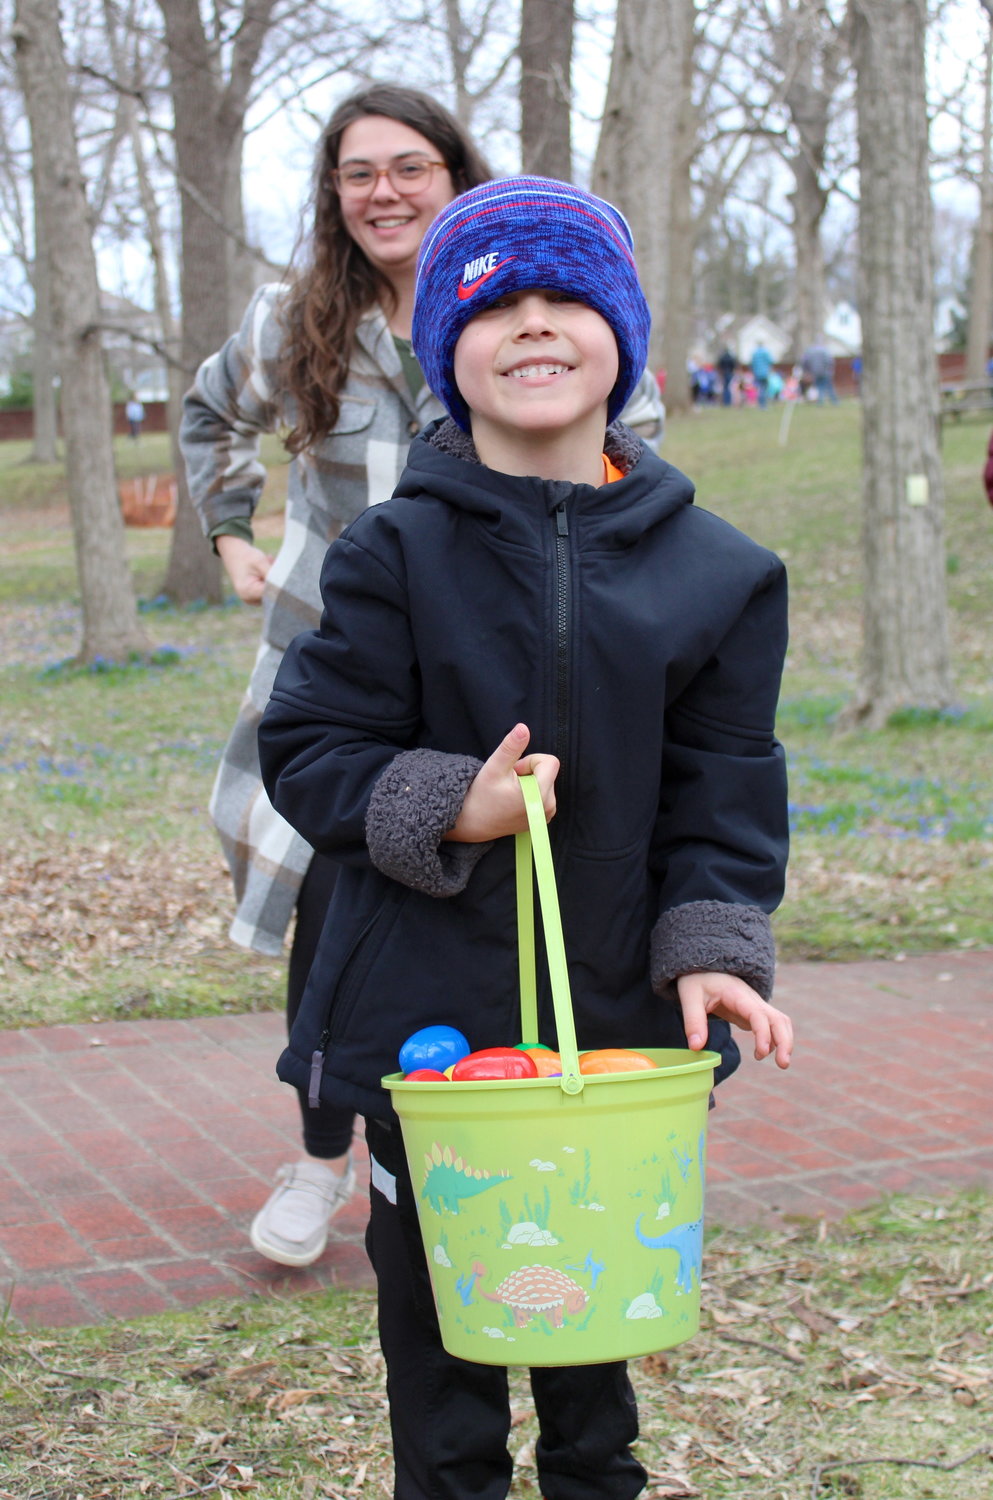 Xander Ruiz, 5, quickly fills his Easter basket with eggs, showing he doesn’t crack under pressure.